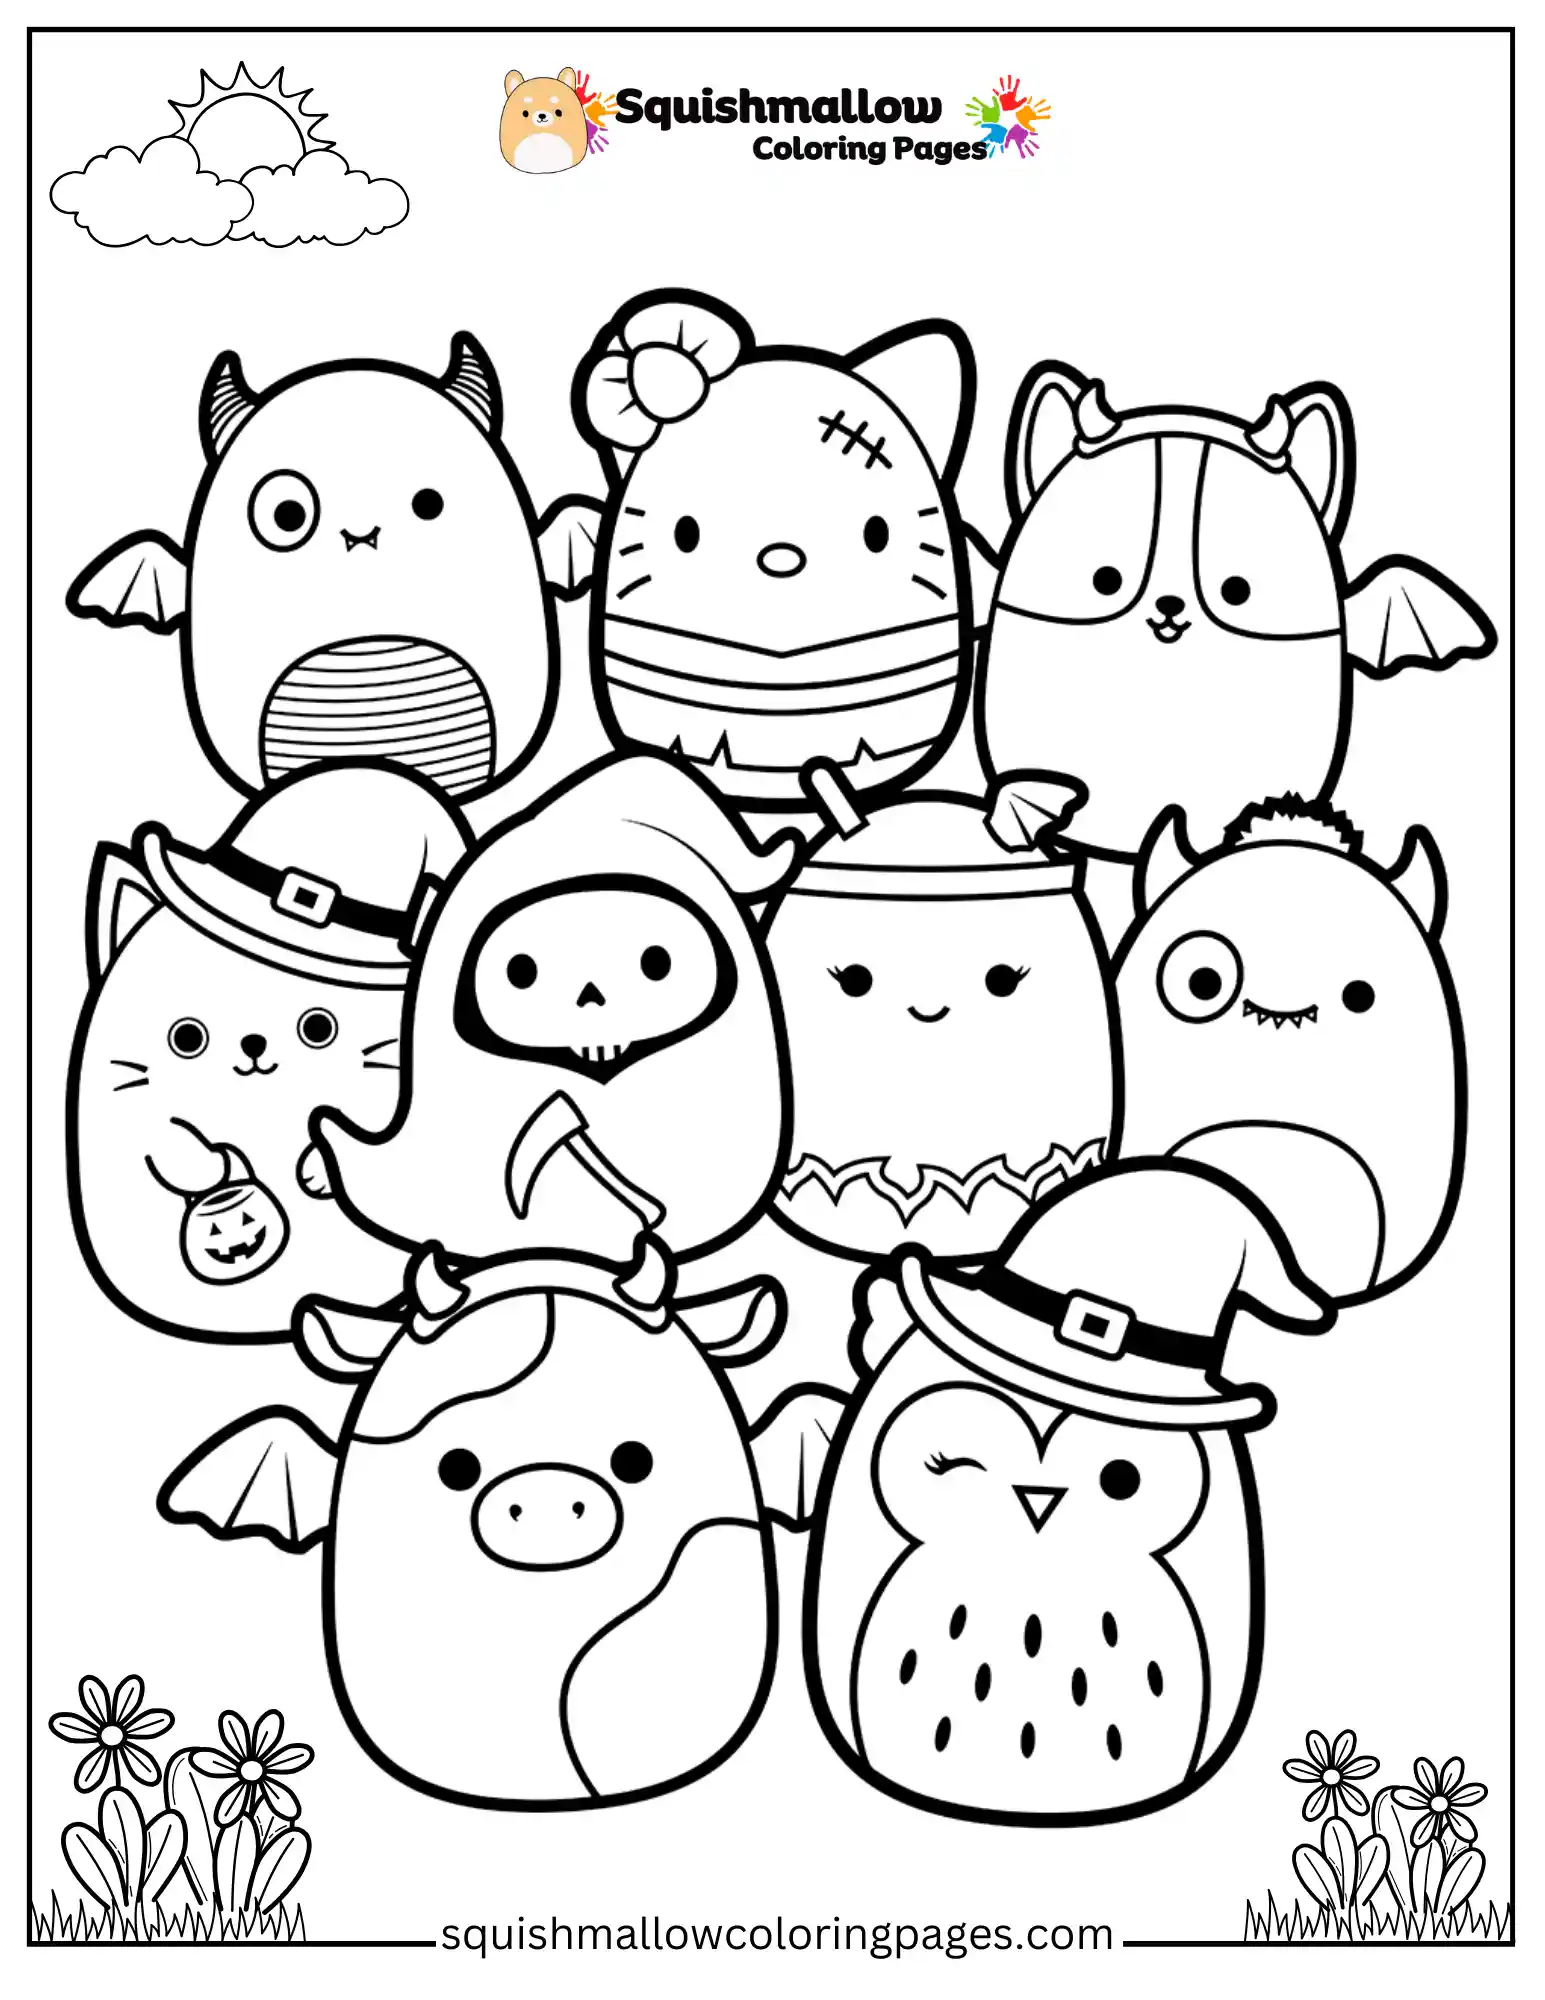 9 Squishmallows Coloring Pages